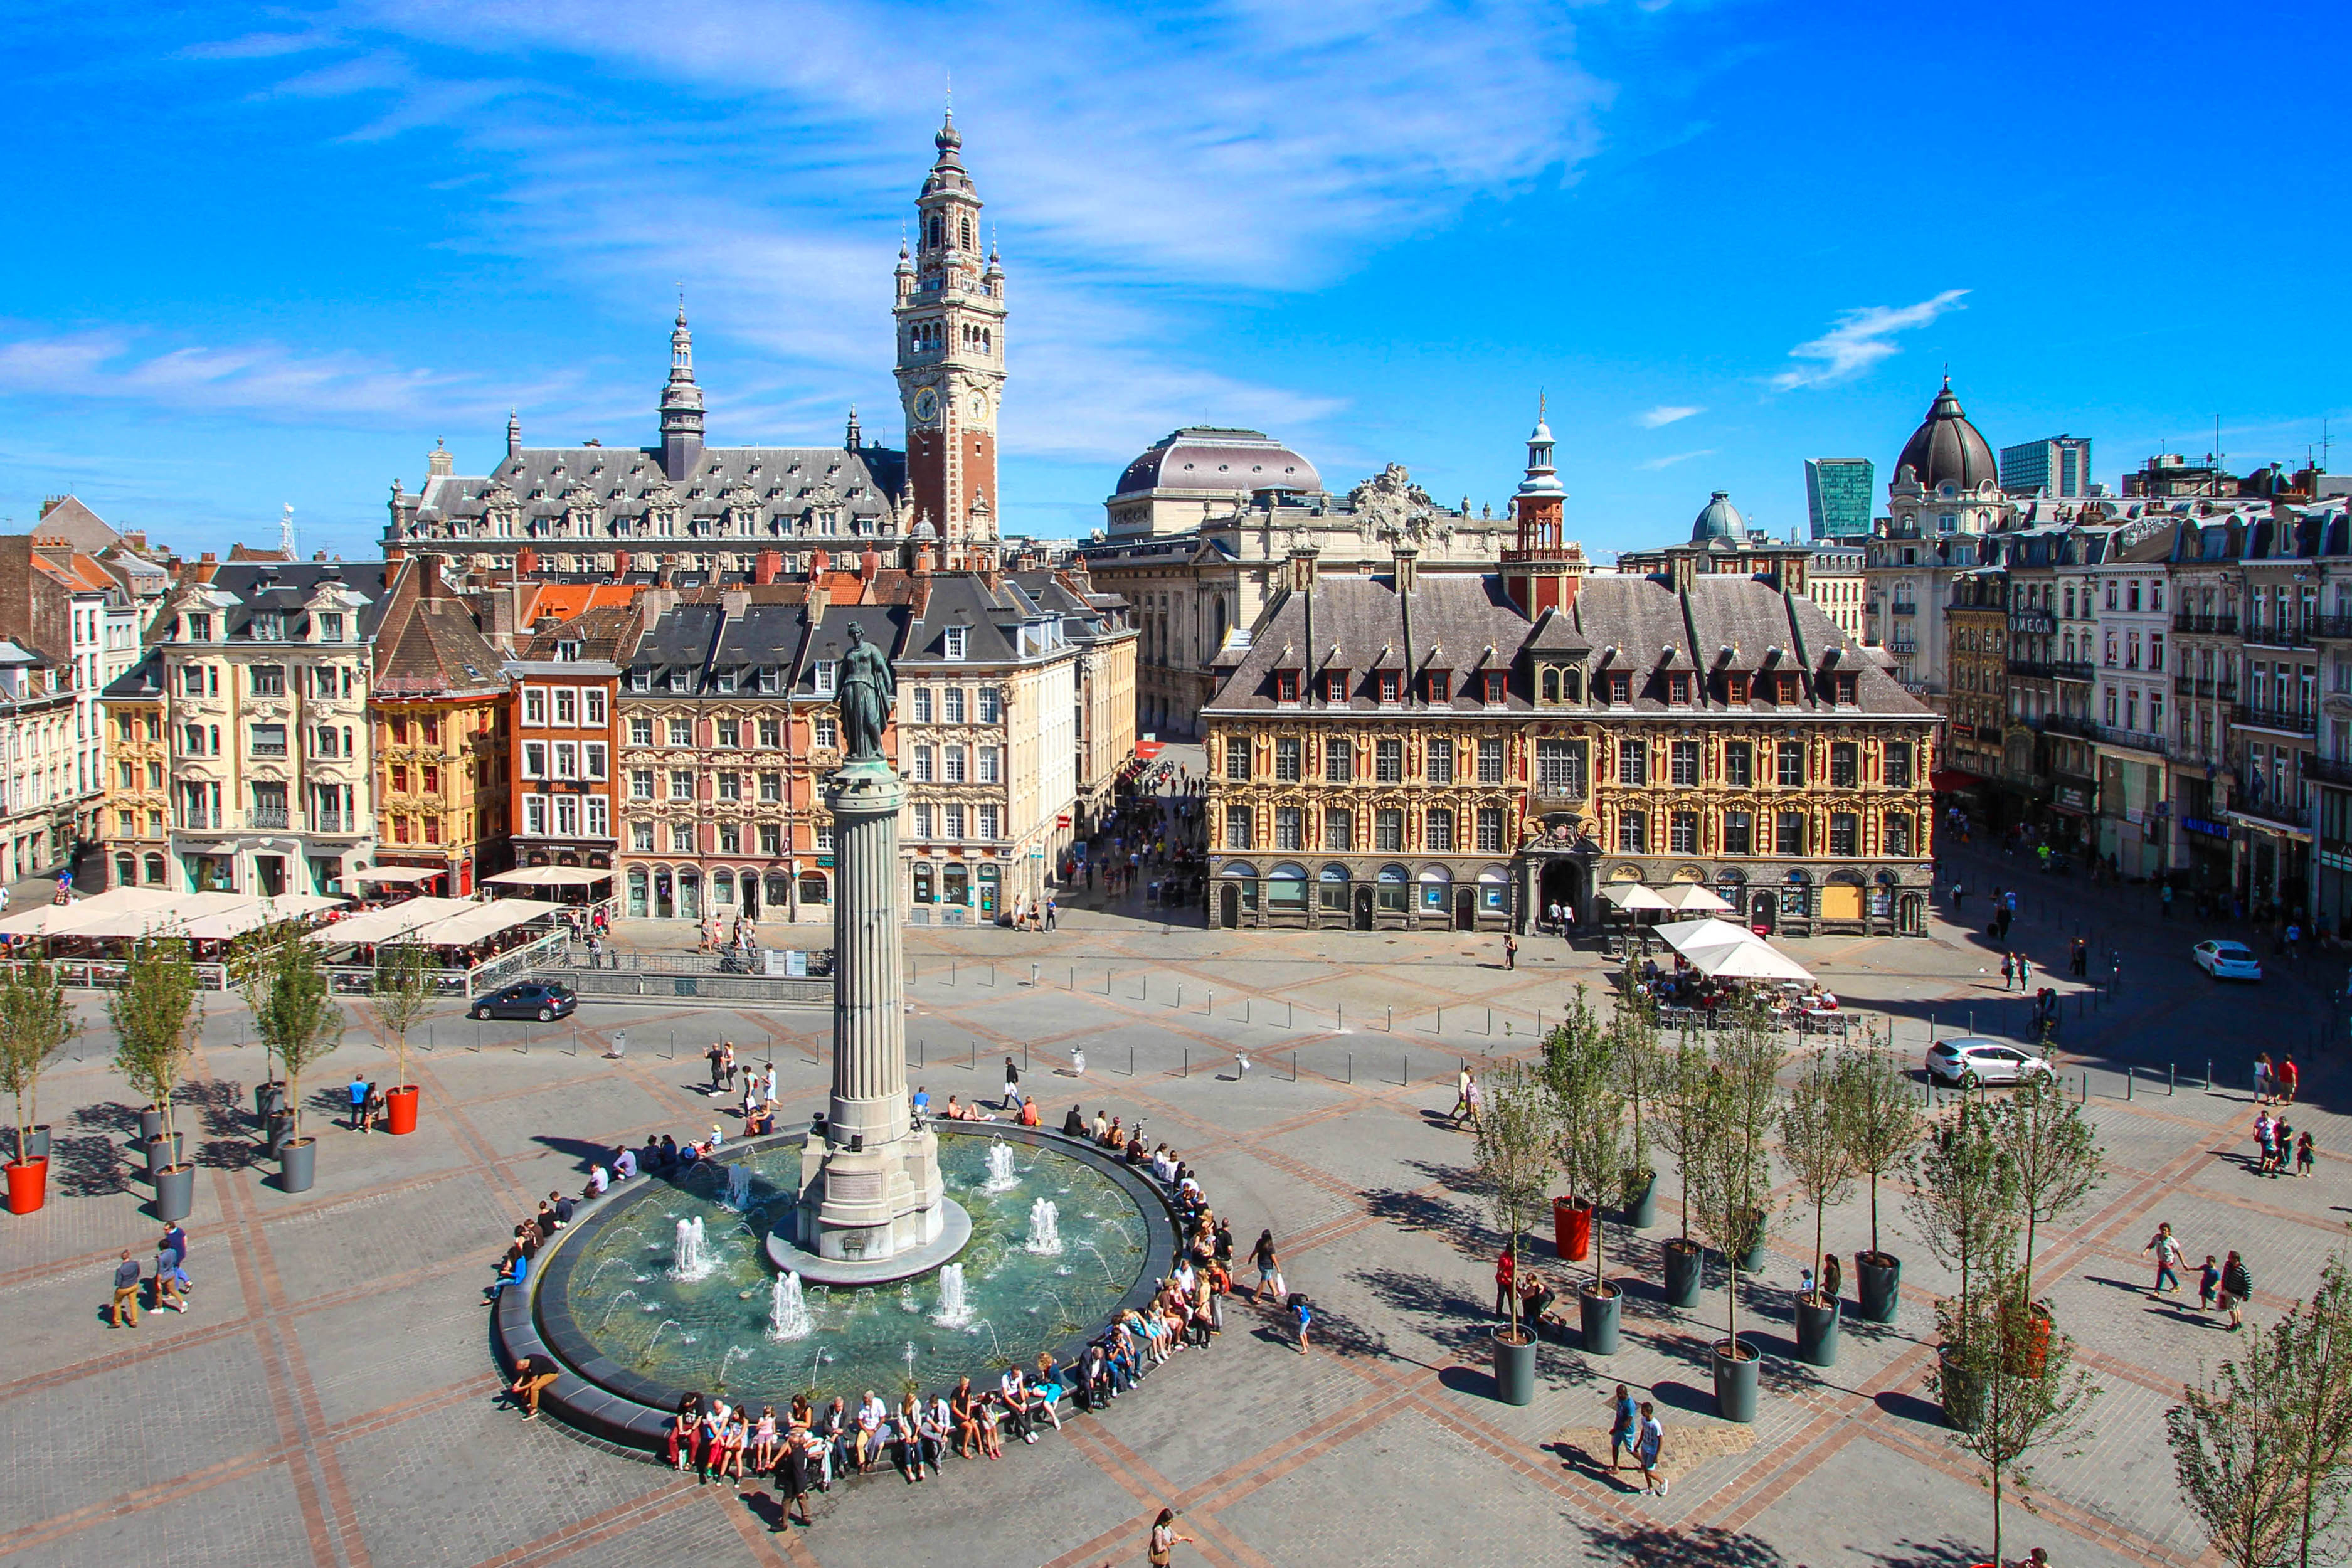 Still known as the "Capital of Flanders", Lille has had an eventful history from the Middle Ages to the French Revolution. You can't run in Lille without taking the classic run in the Citadelle park, but don't forget to take a walk in the rich city centre!